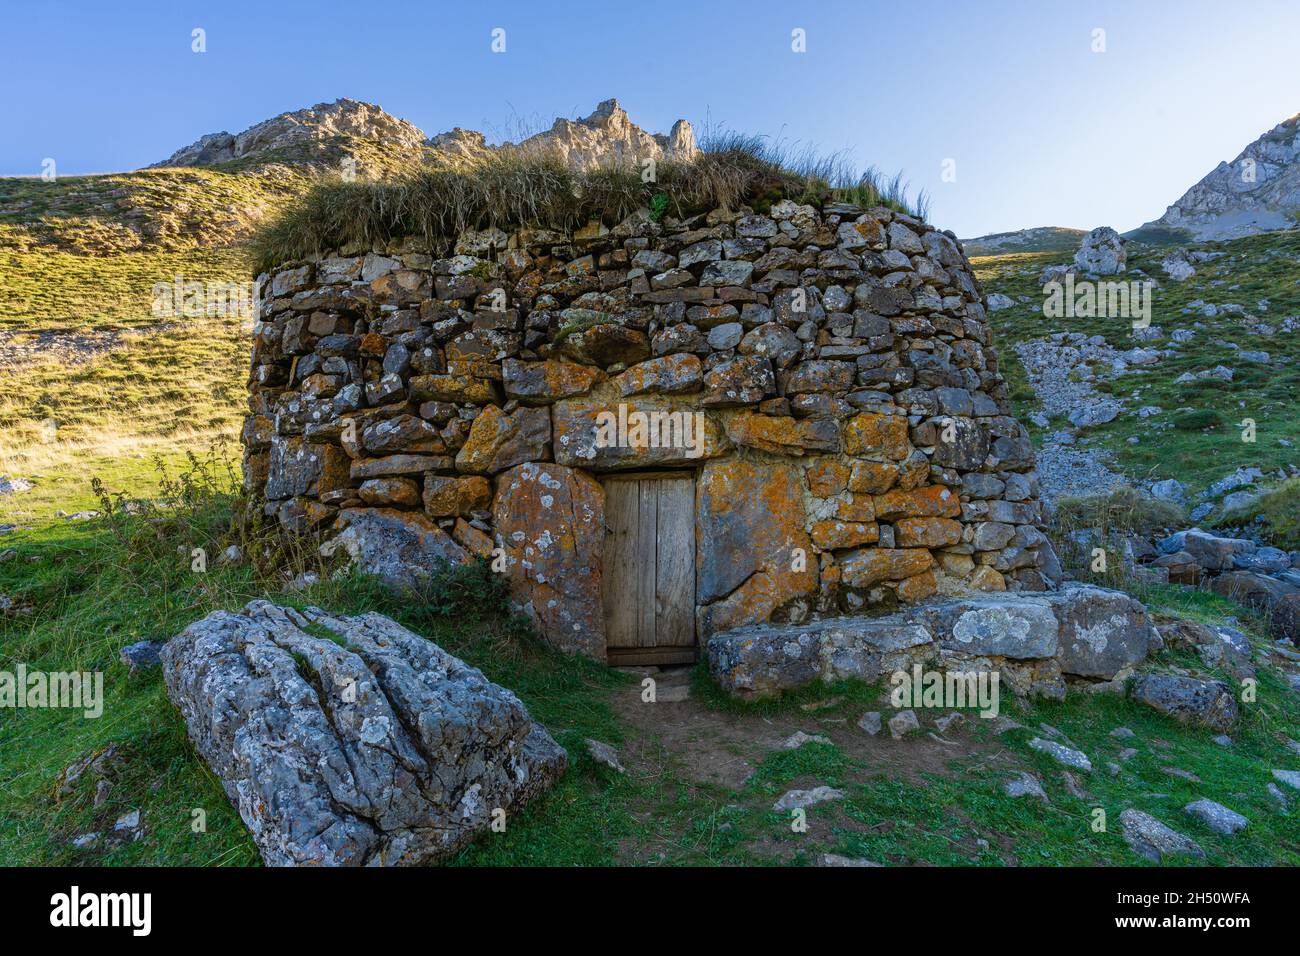 Hut, corro, made of stone with a broom roof, teito, in the Sousas valley in the Somiedo natural park in Asturias  Stock Photo